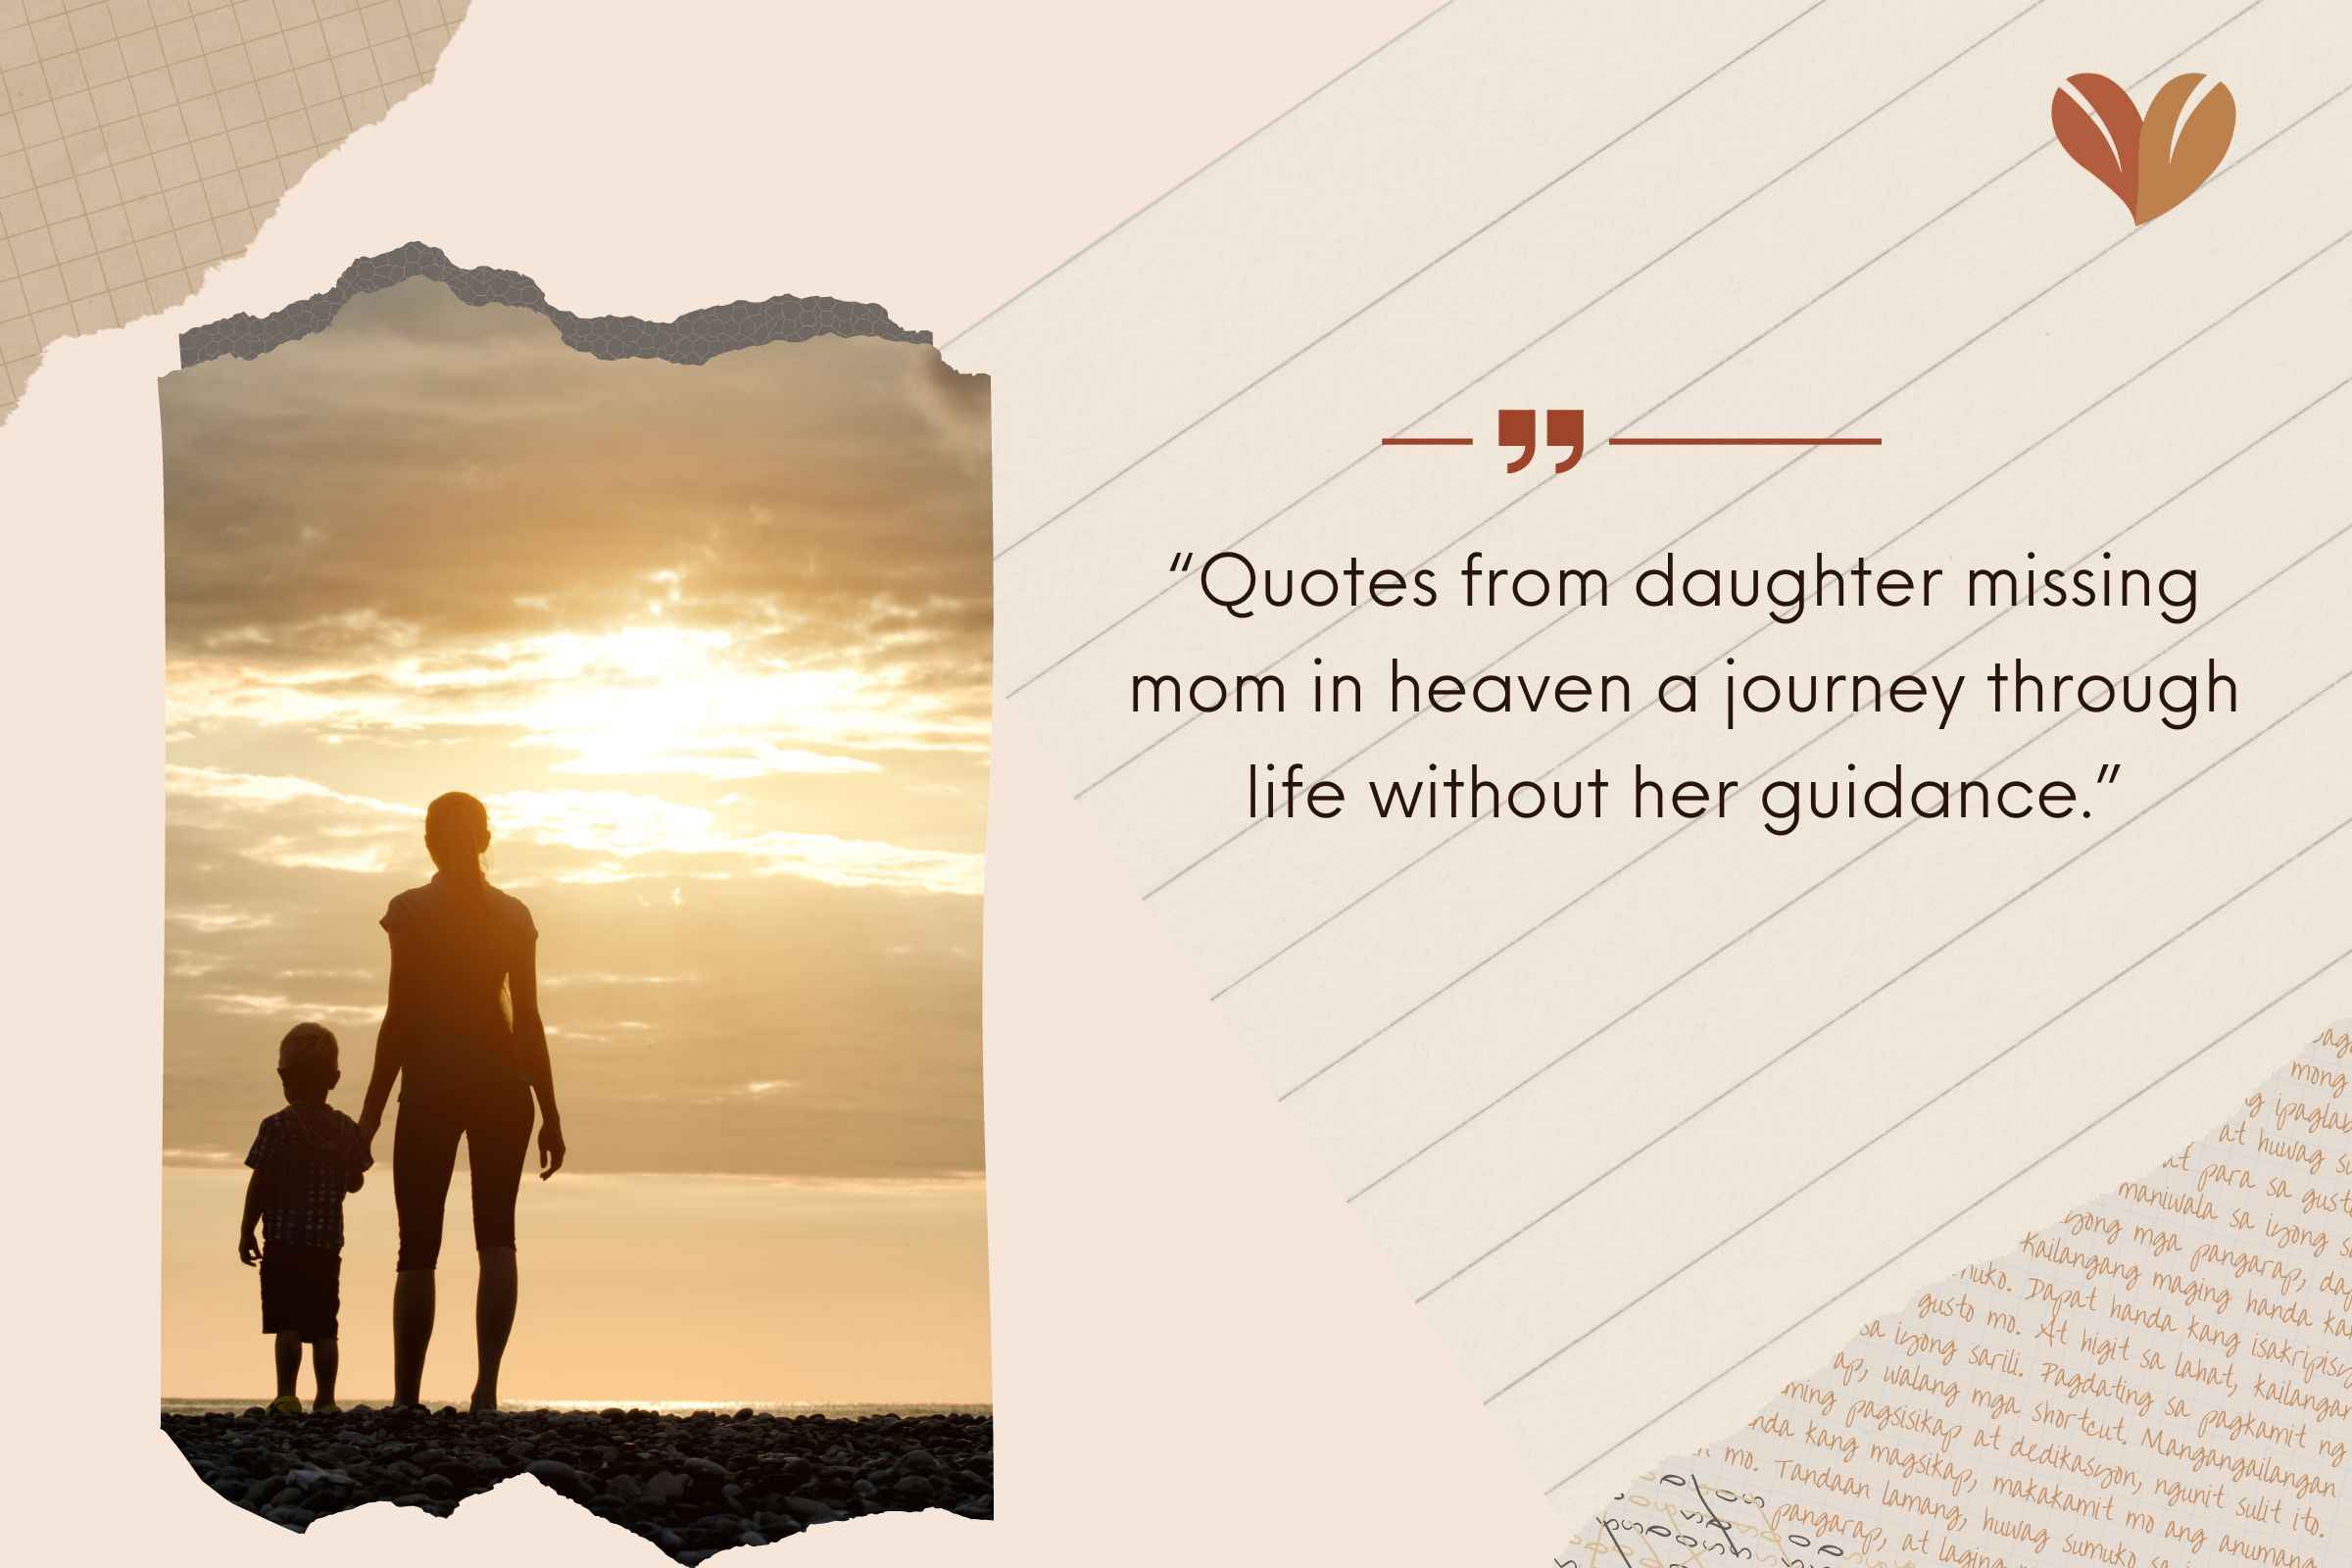 “Quotes from daughter missing mom in heaven a journey through life without her guidance.”